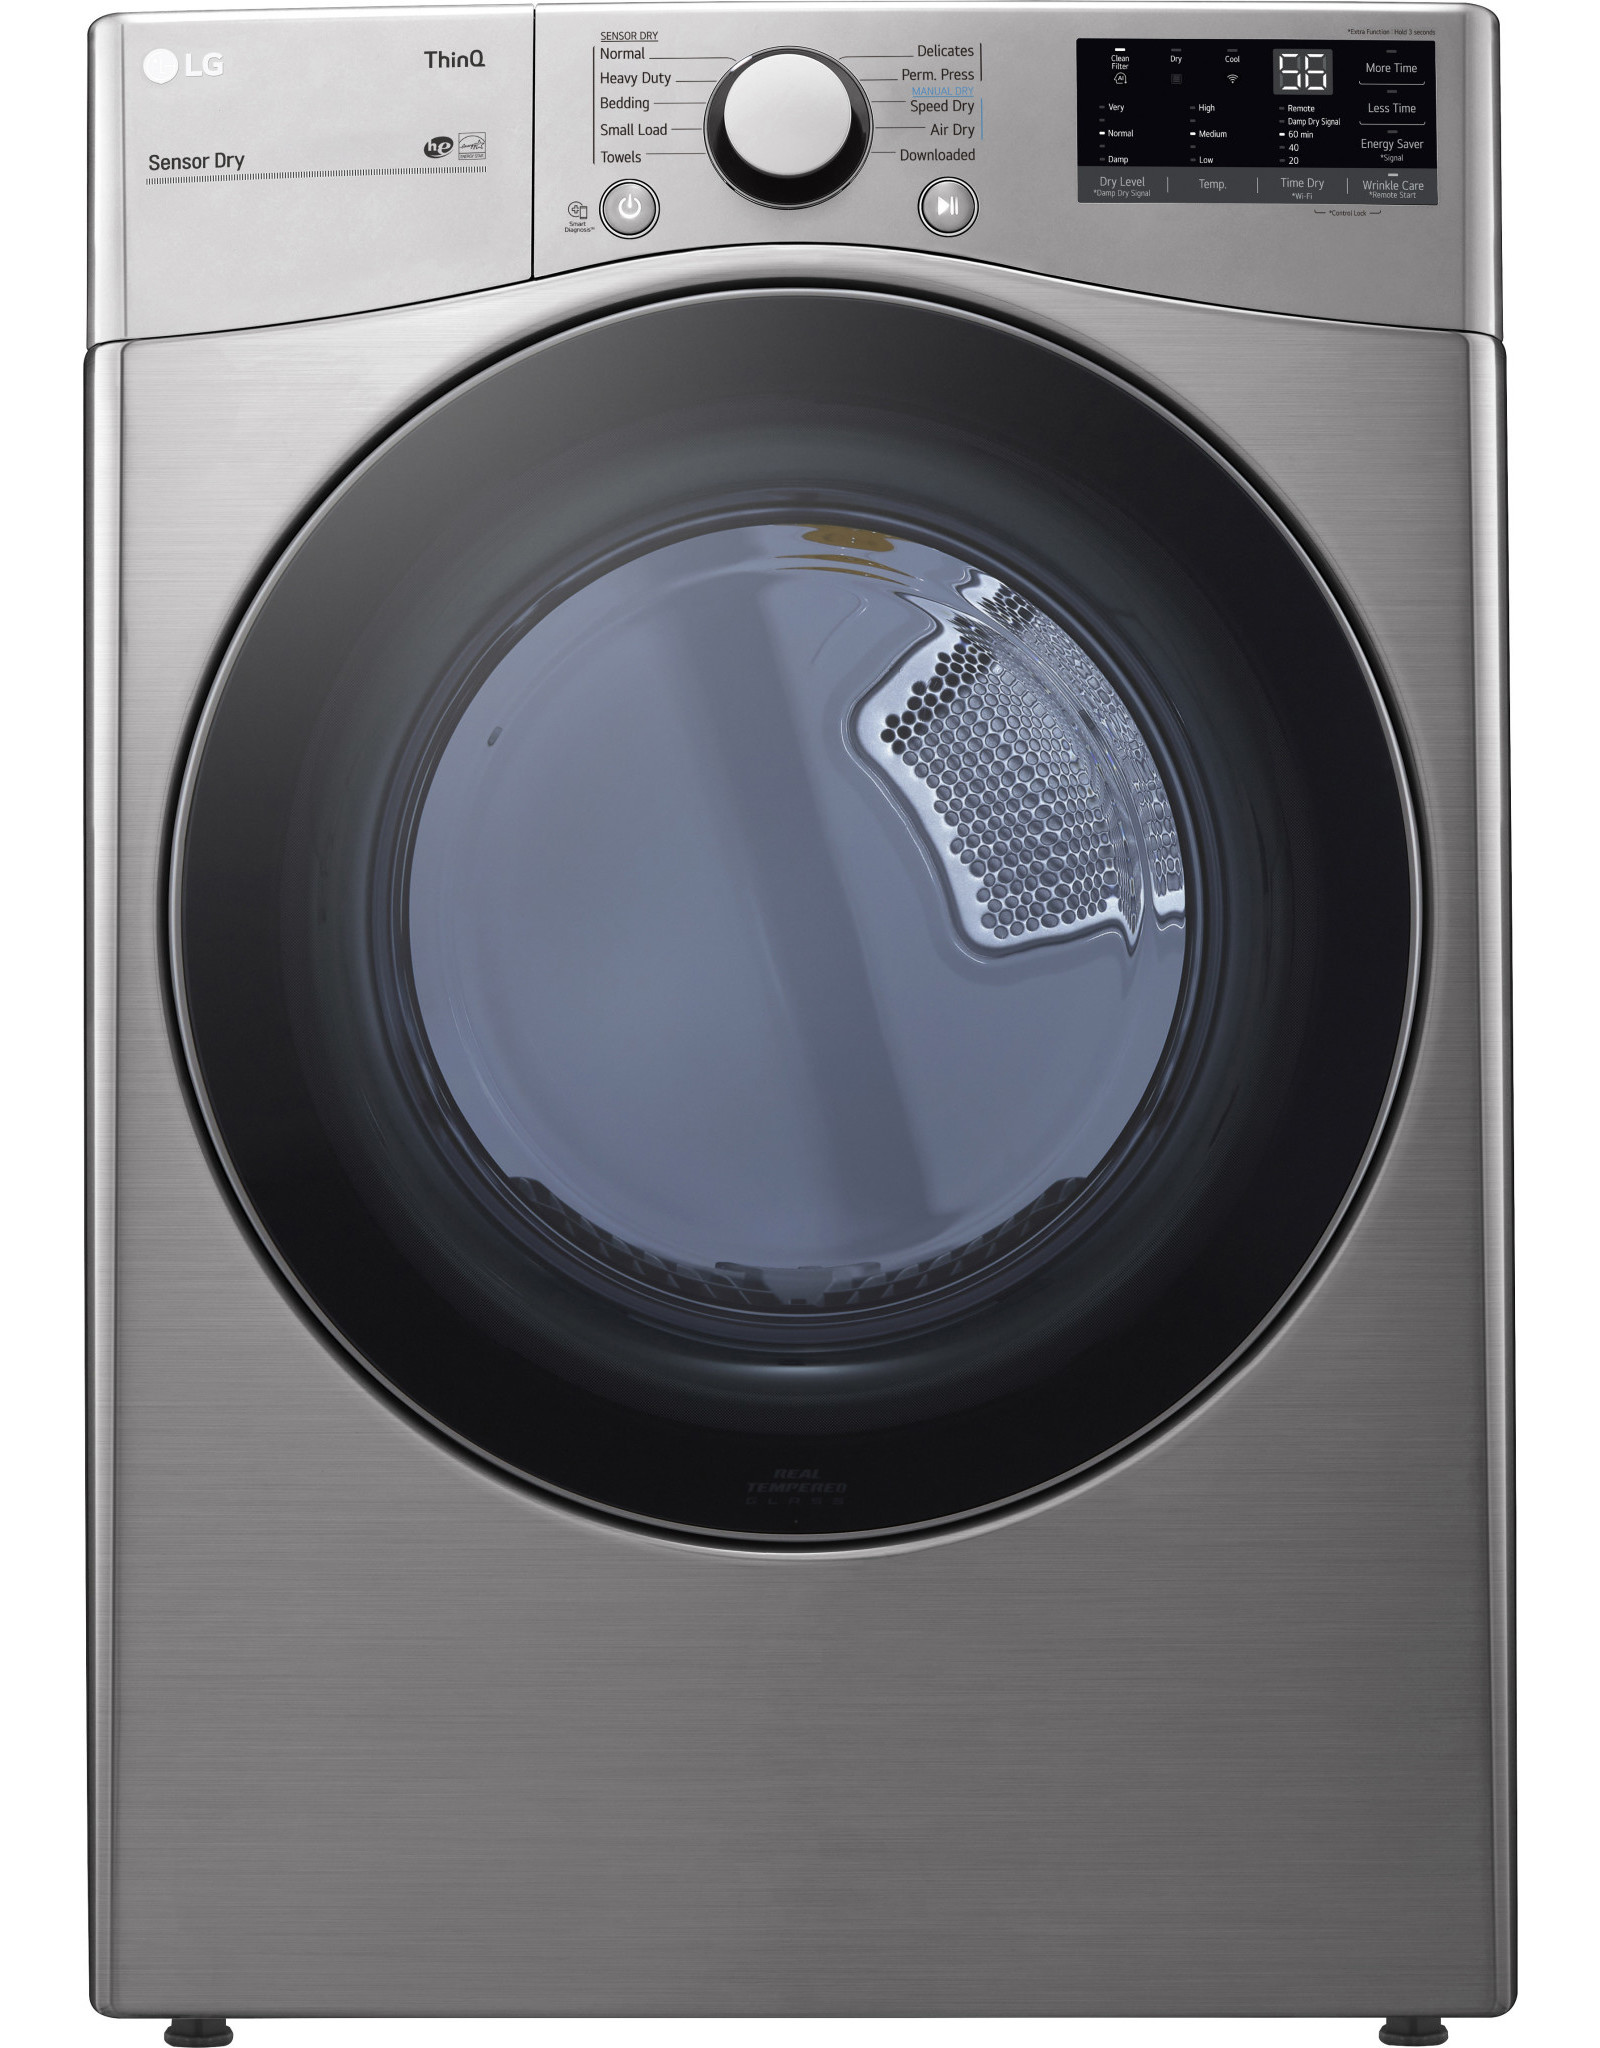 lg DLE3600V 7.4 cu. ft. Ultra Large Capacity Graphite Steel Electric Dryer with Sensor Dry